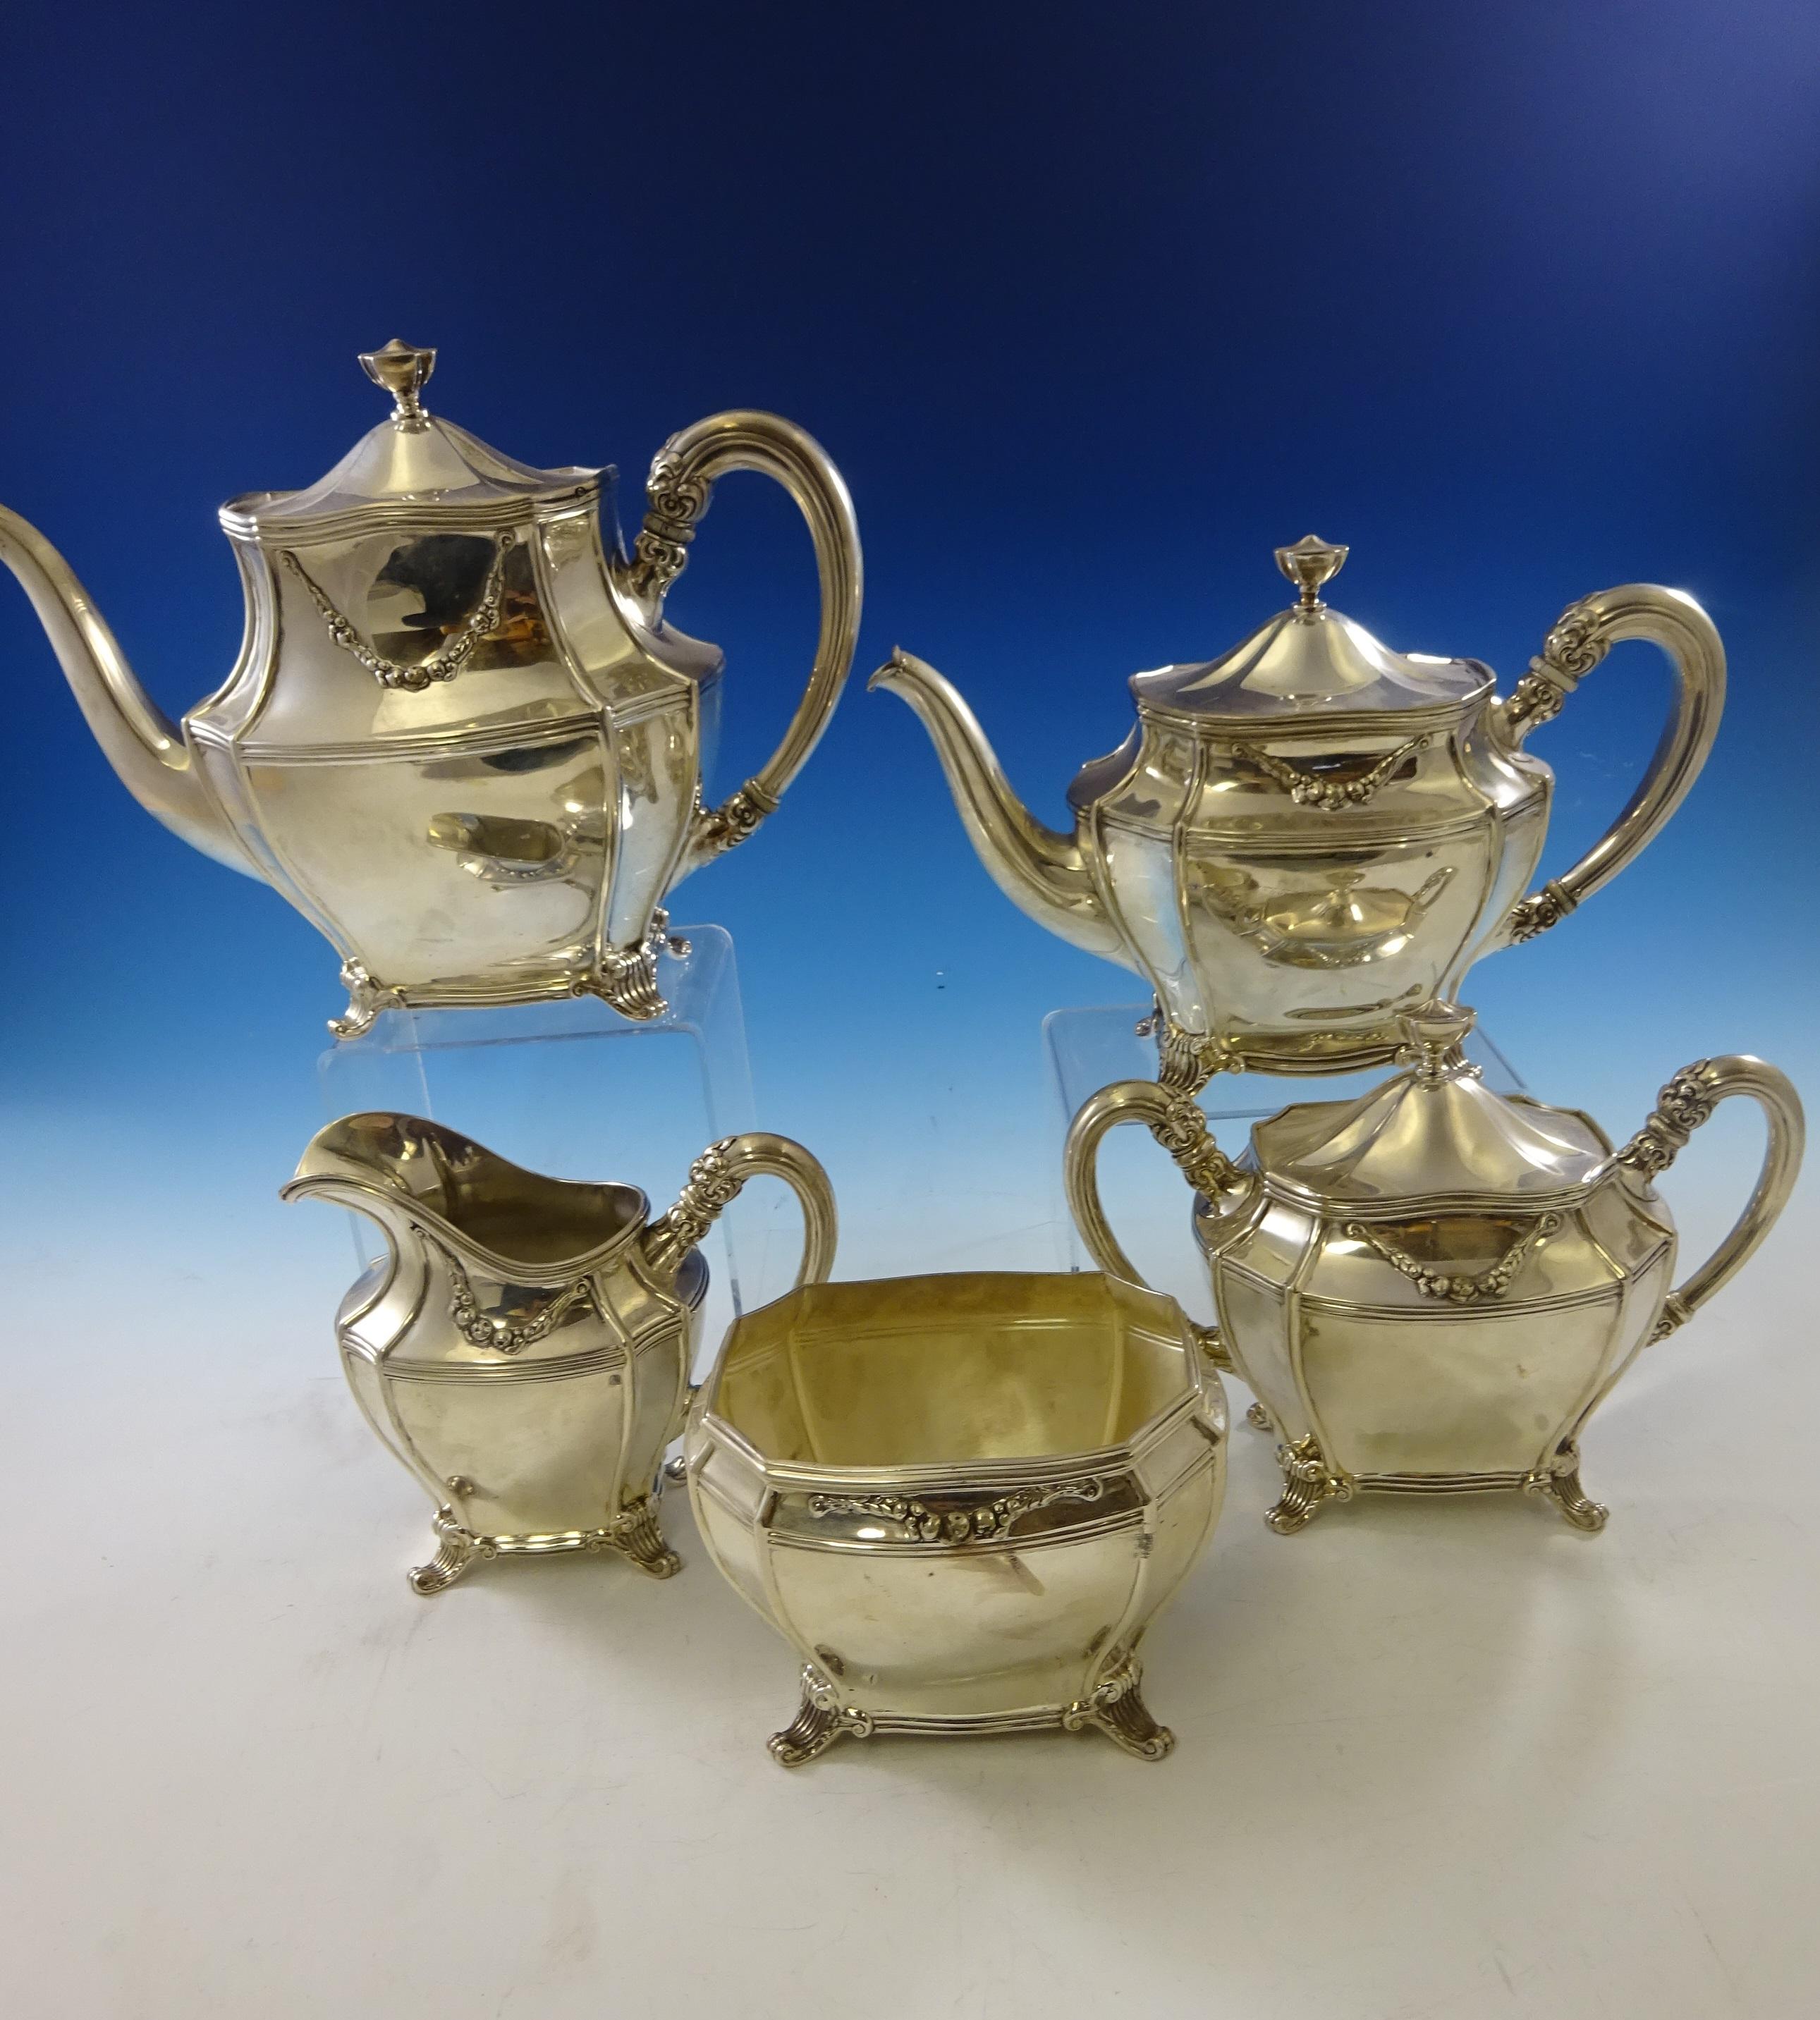 Georgian by Towle
Superb 5-piece Georgian by Towle sterling silver tea set. It is decorated with columnar feet and applied swag with flowers. The set includes:

Measures: Coffee pot: Measures 8 tall, 11 wide, and it weighs 29.7 ozt.
Tea pot: